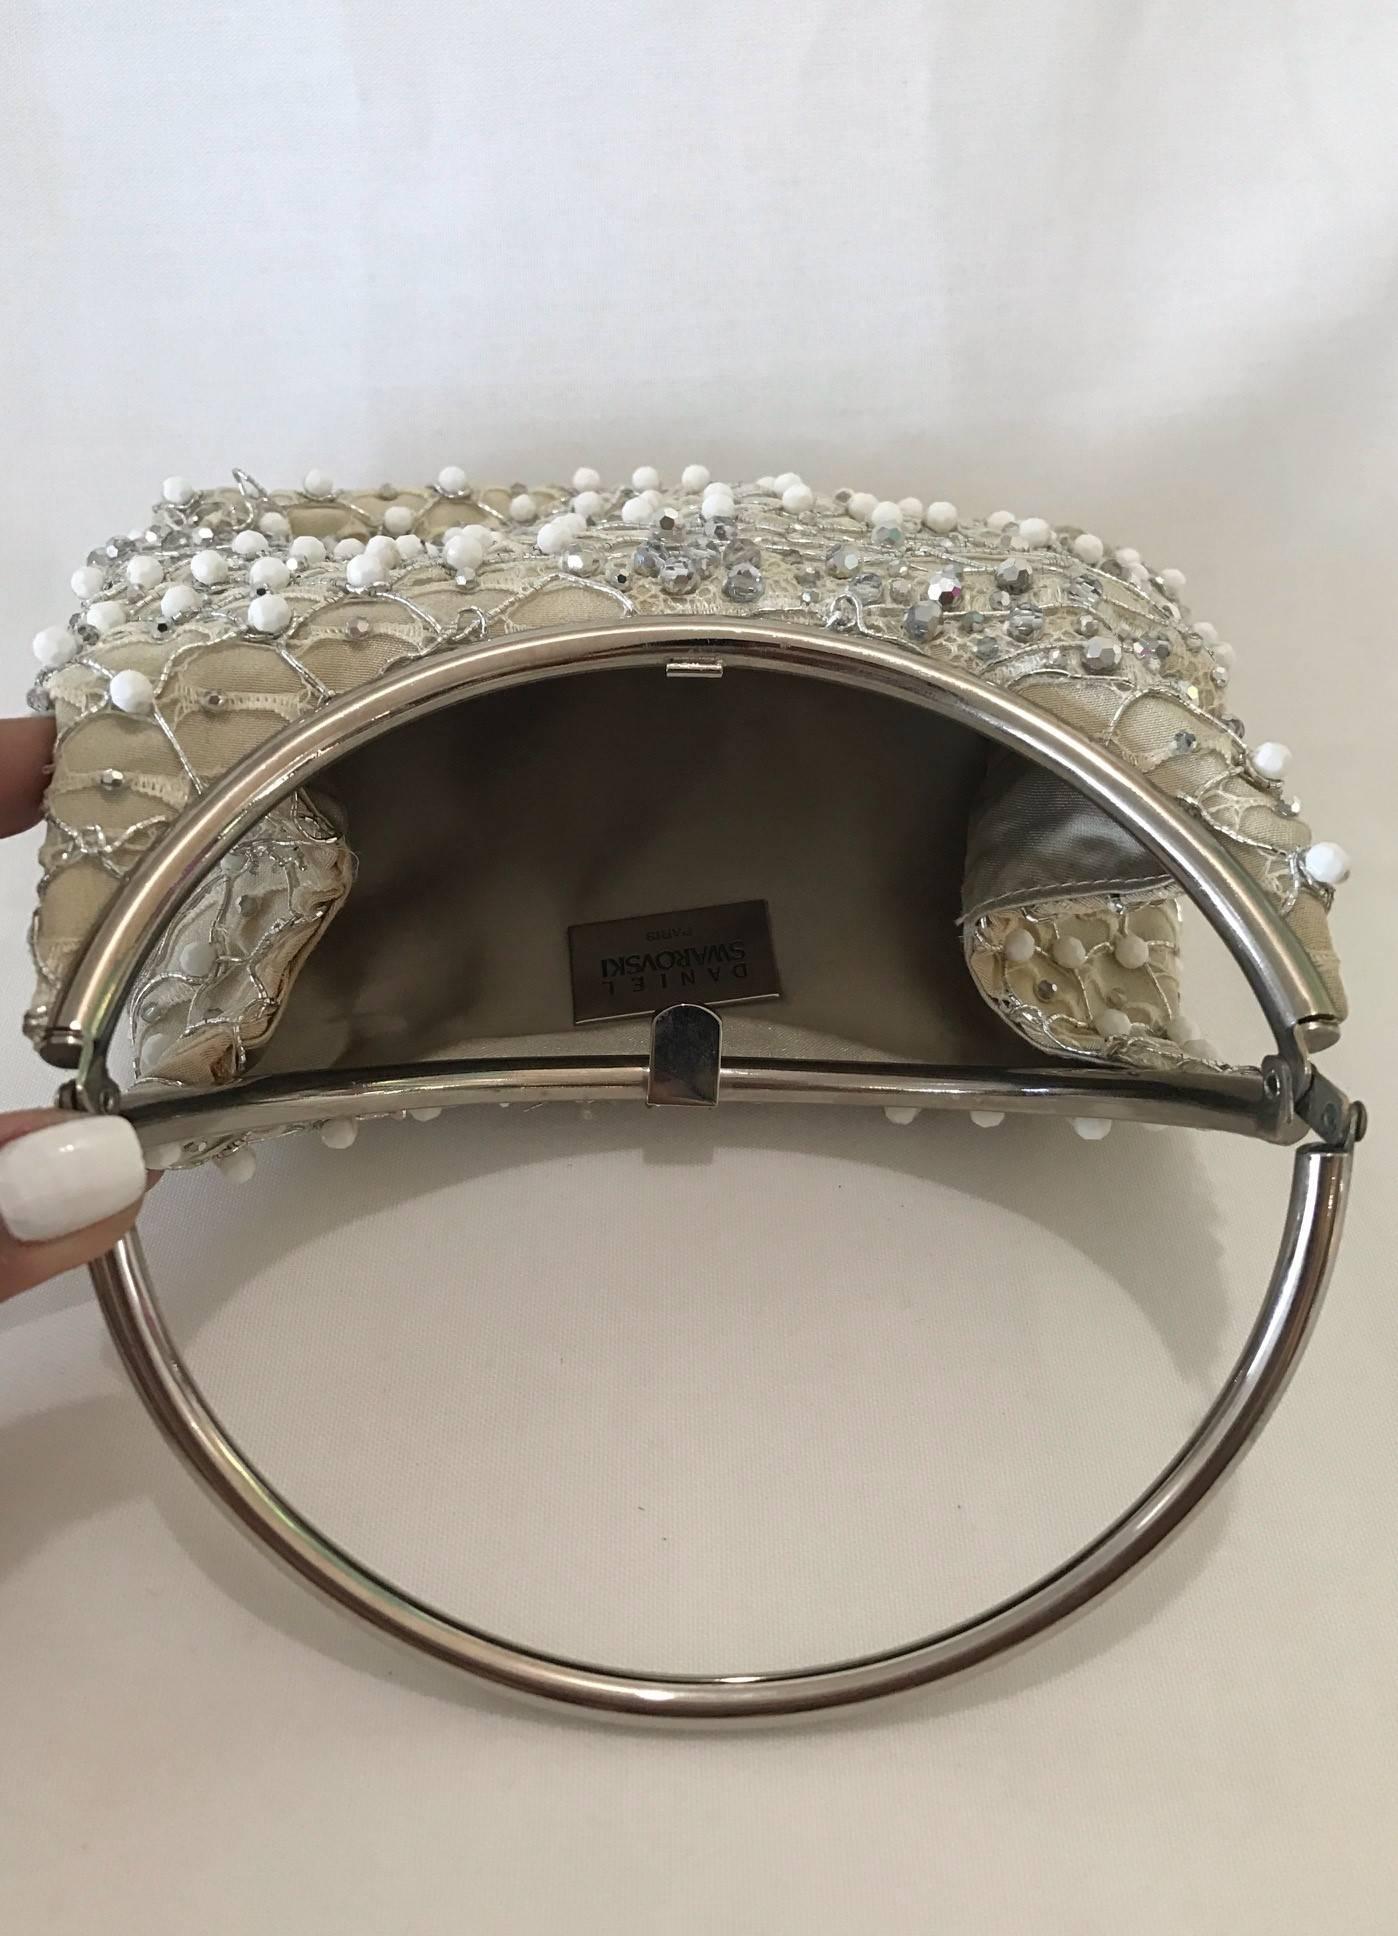 Beaded Beauty! Authentic Crème Colored Daniel Swarovski Bag In Excellent Condition For Sale In Westport, CT